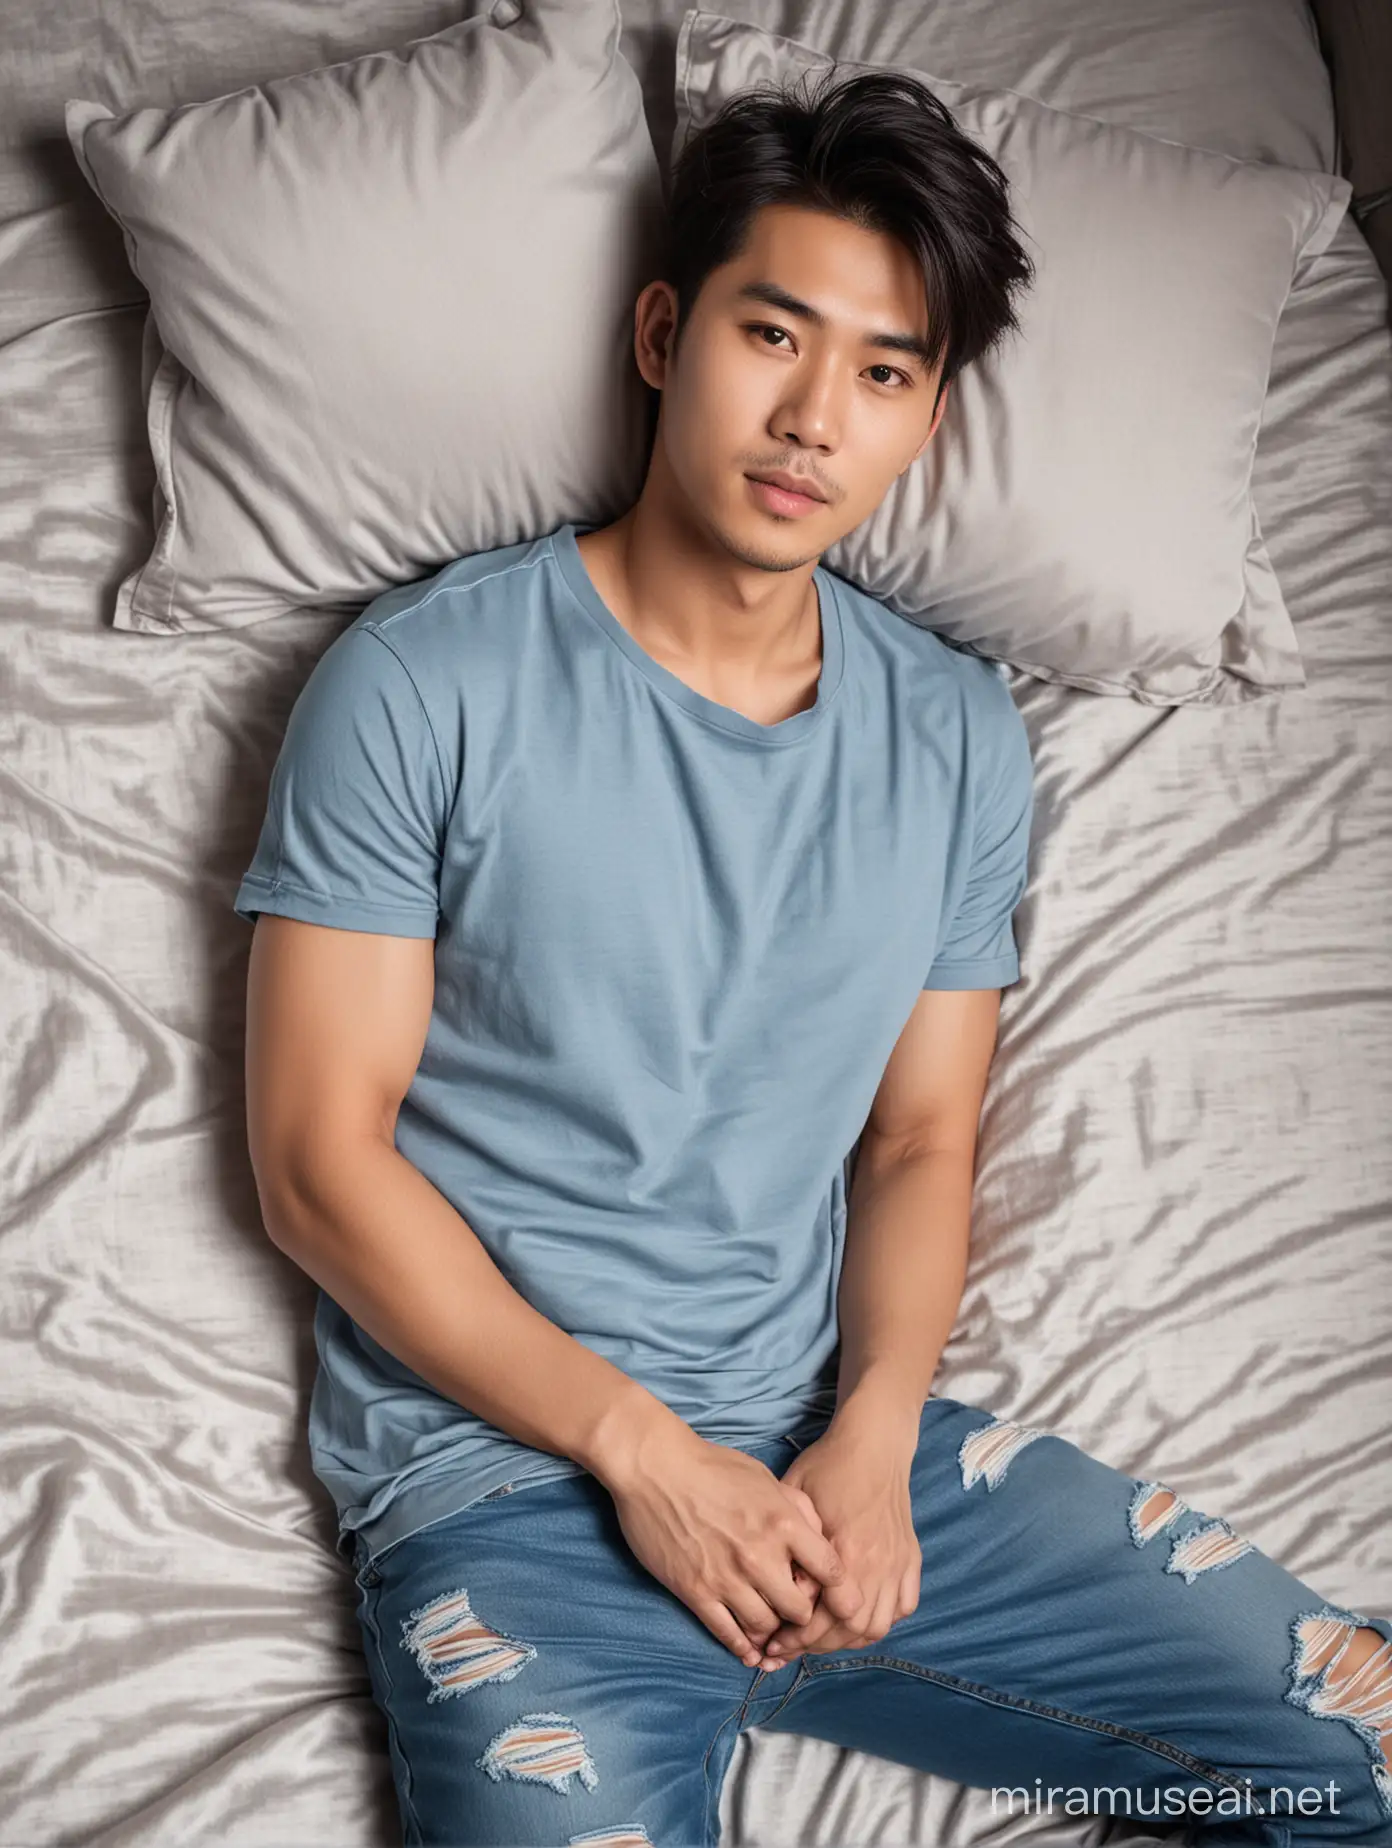 Seductive Asian Man in Blue Grey Tshirt and Ripped Jeans on Satin Bed